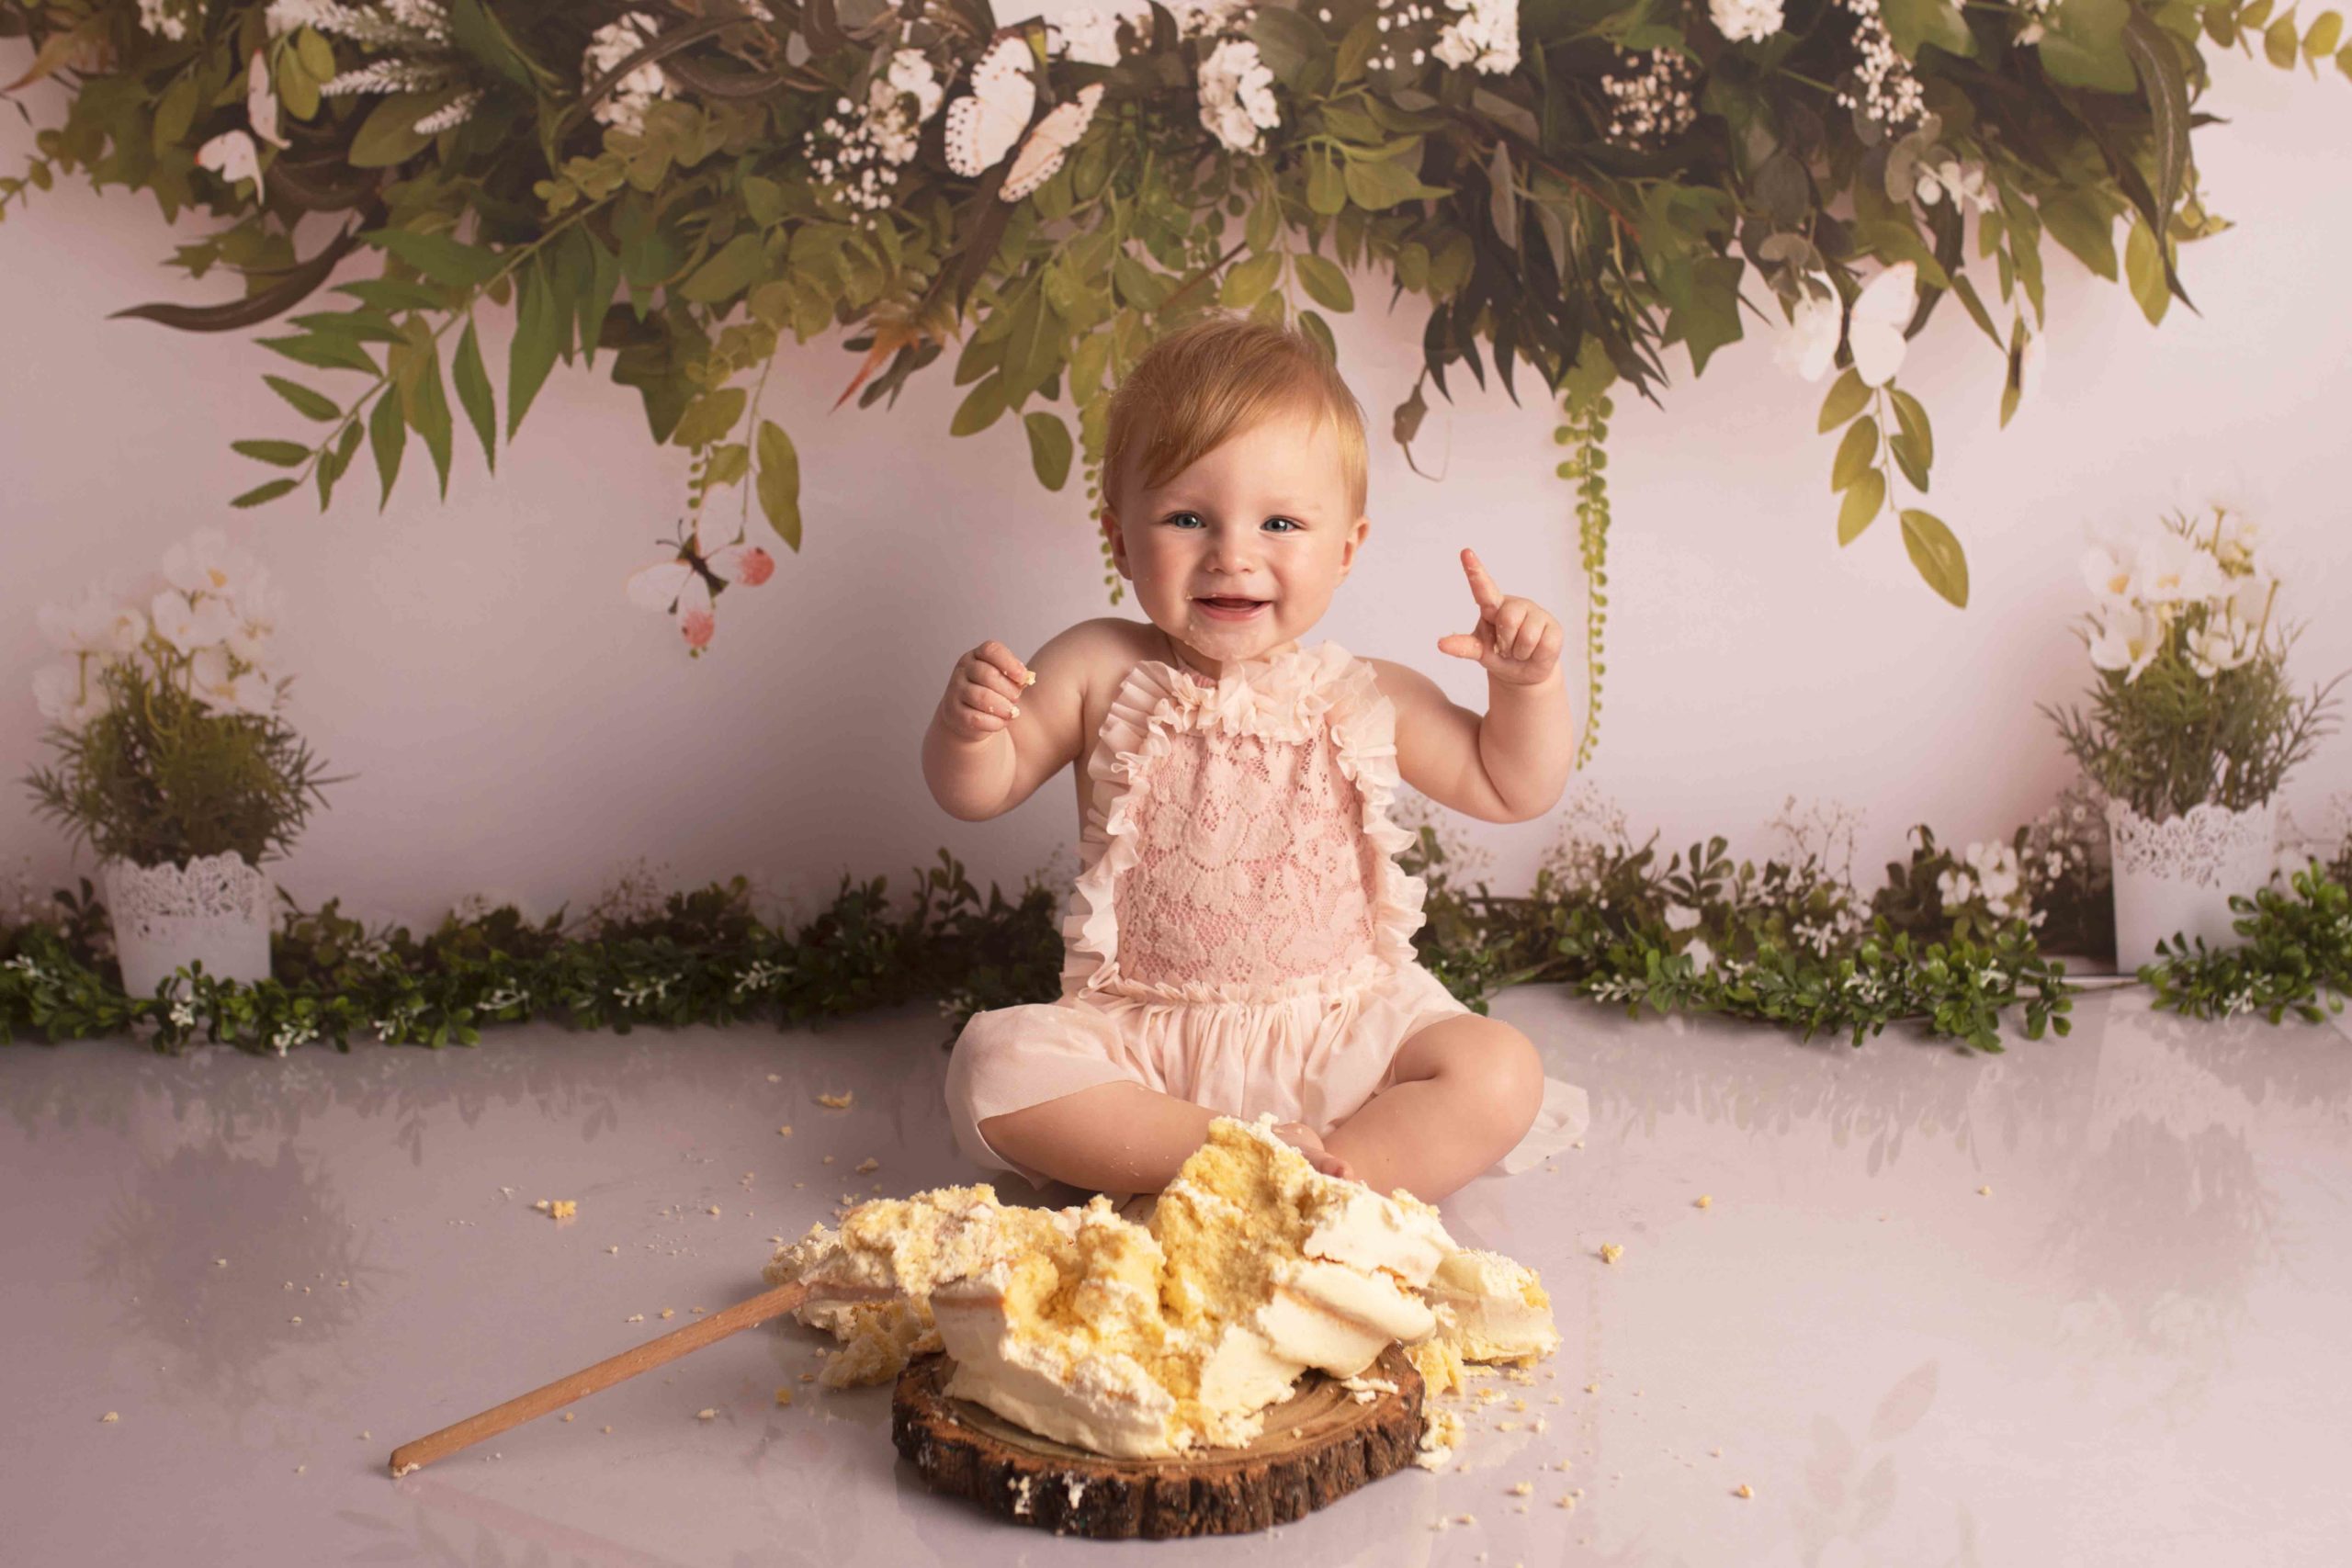 Cake Smash Photoshoot - celebrate babies first birthday. This little girl is smashing the cake with big smile on her face. Photographed in my studio in Strood, Medway 